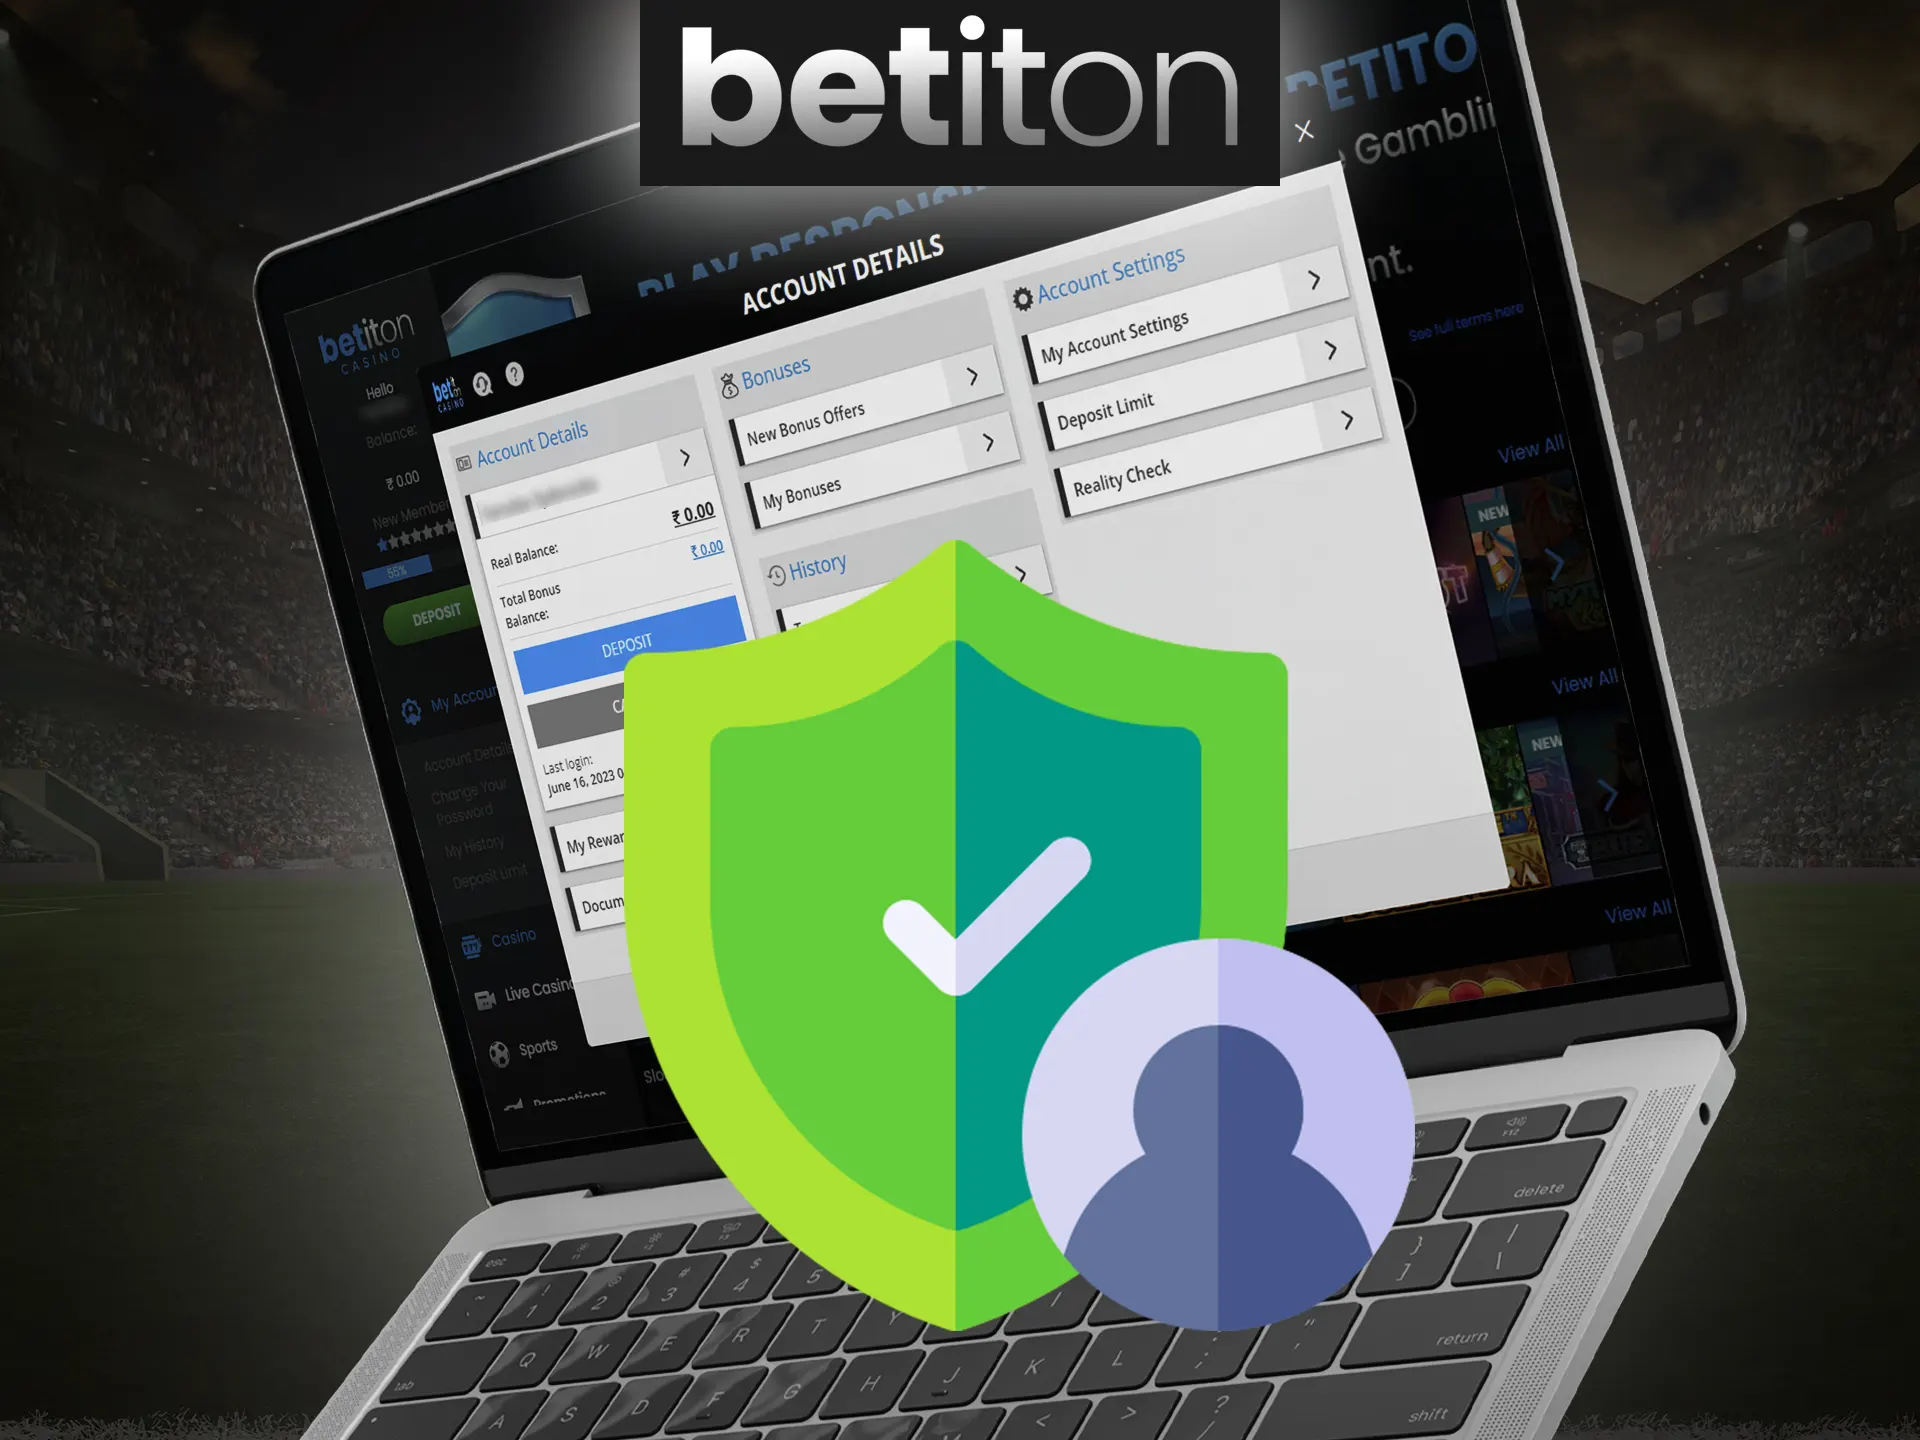 Betiton secures all of your private data.